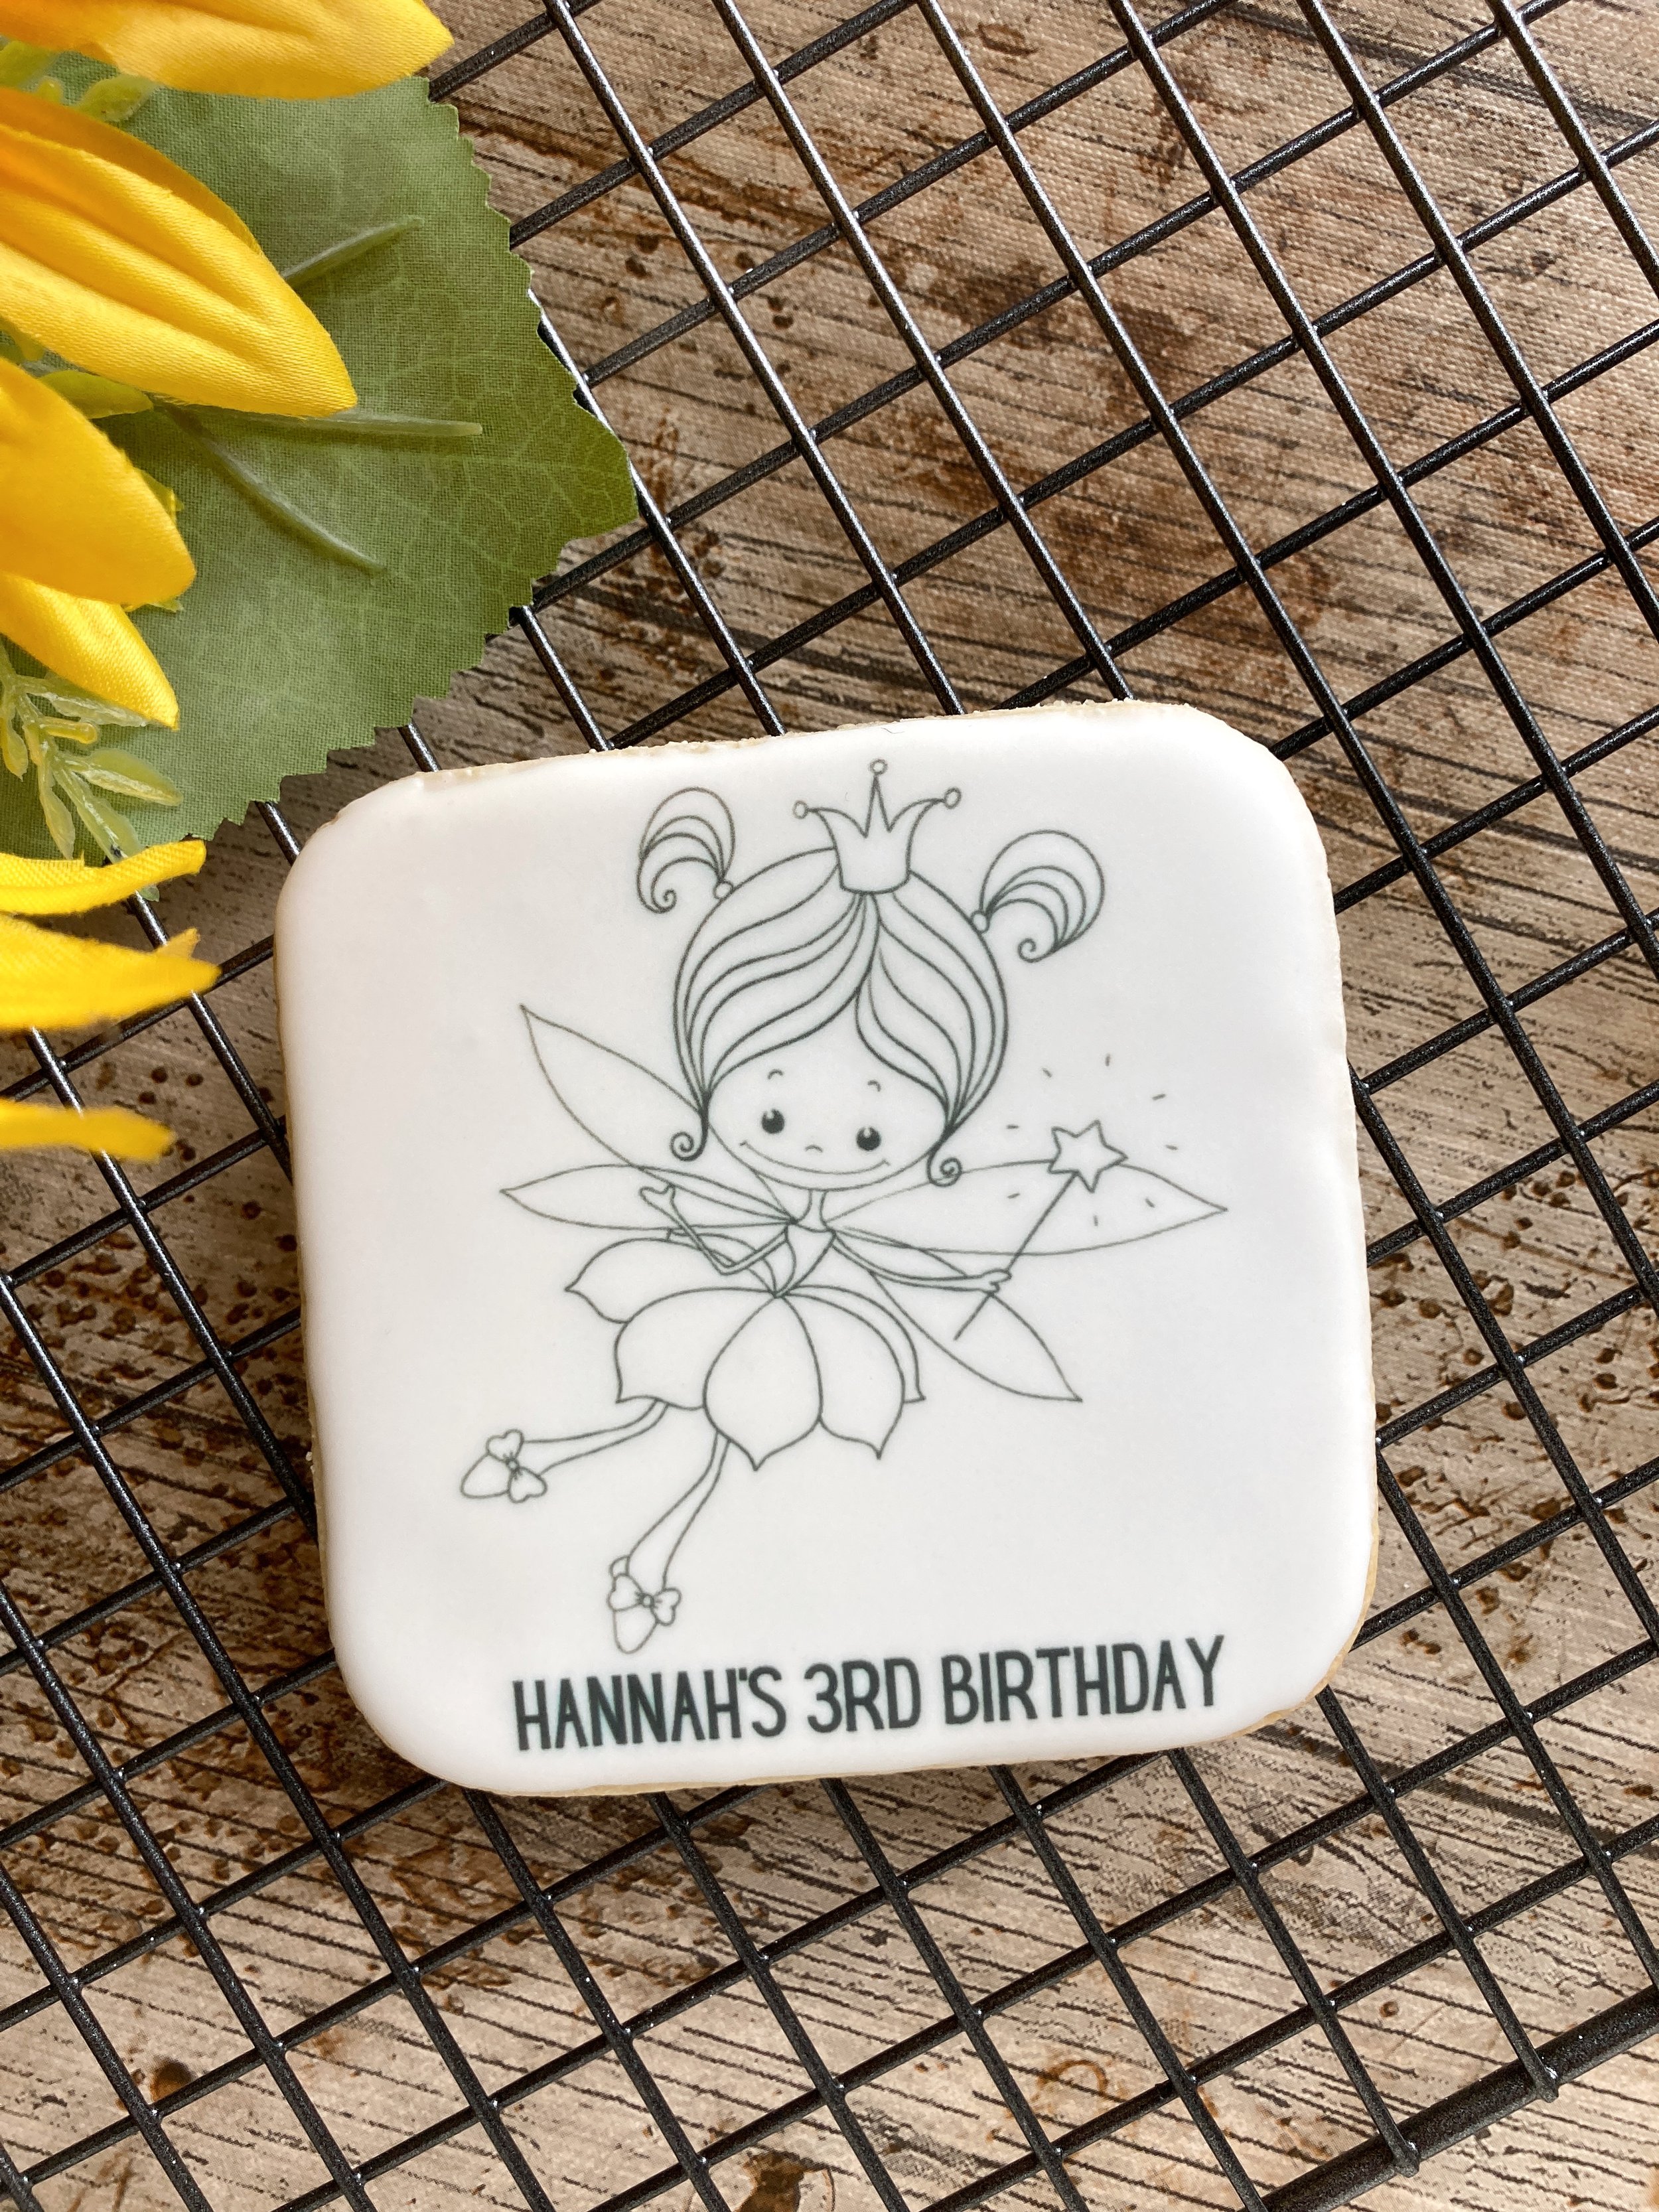  Custom paint your own cookies for Hannah’s 3rd birthday. A cute fairy is outlined and will be painted with the paint palette that is included separately. They make for great activities at kid’s parties and a cute idea for party bags / birthday favou